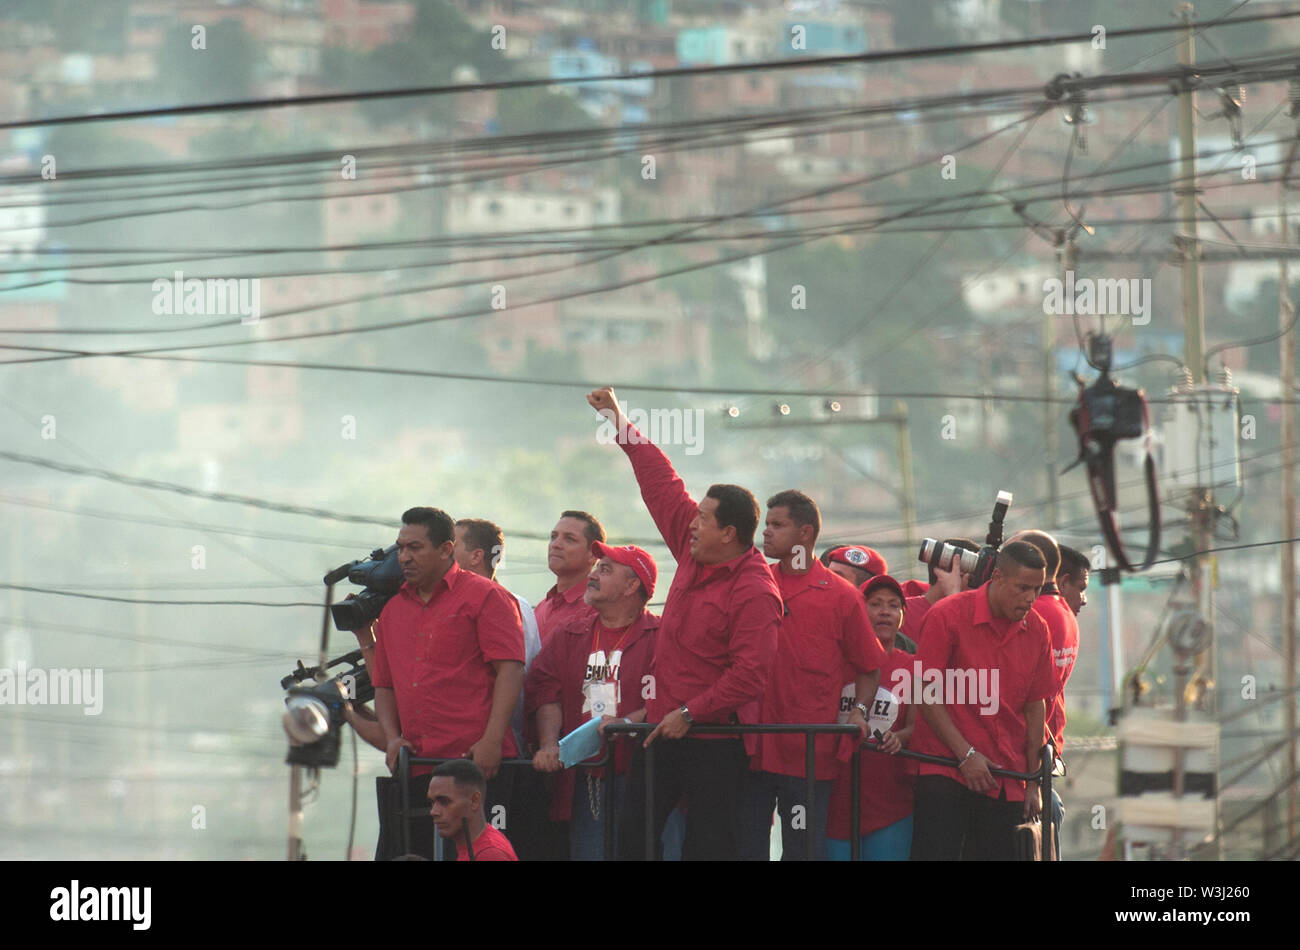 Venezuelan President Hugo Chavez, dressed in red, during an election campaign march in a poor neighborhood in Caracas, Venezuela Stock Photo